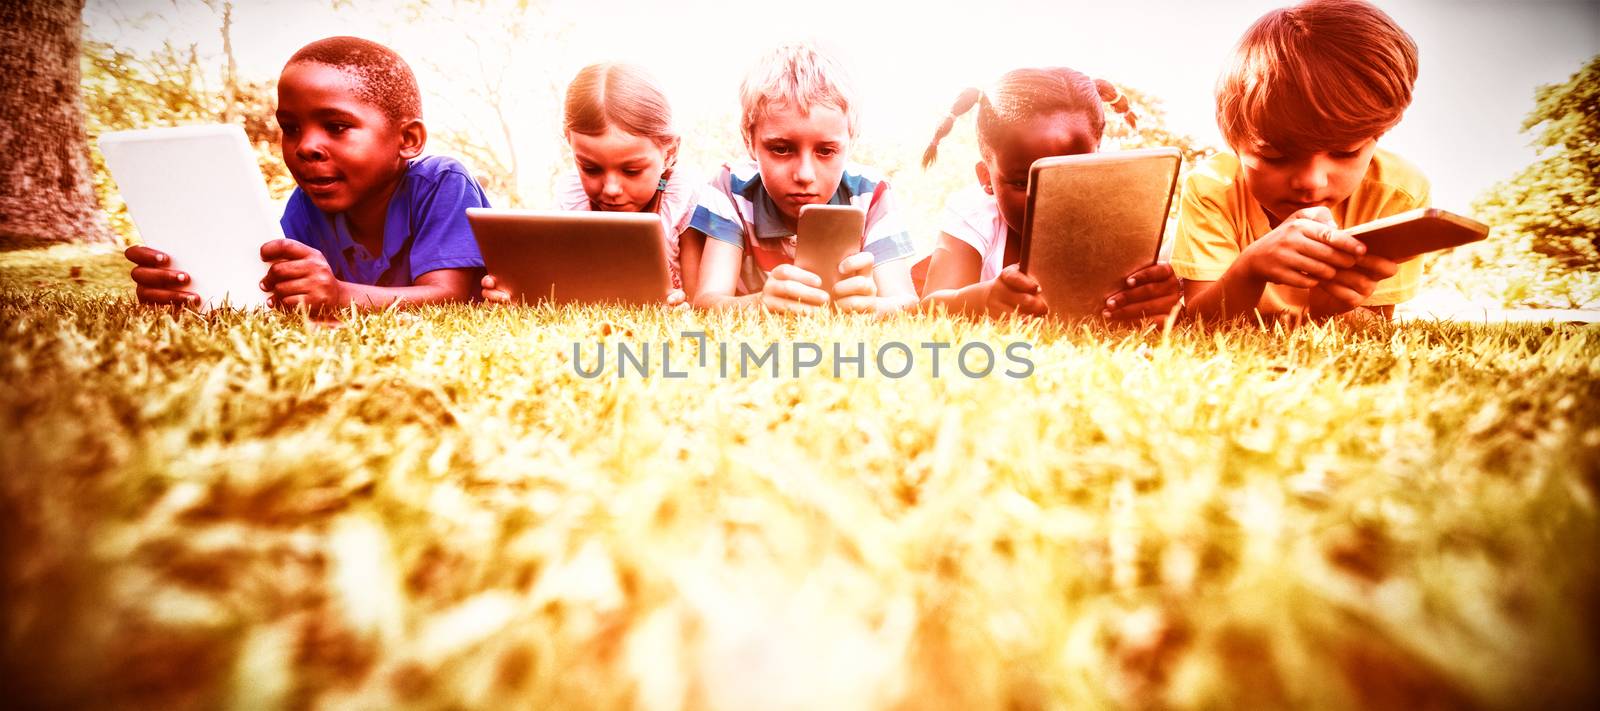 Kids using technology during a sunny day at park